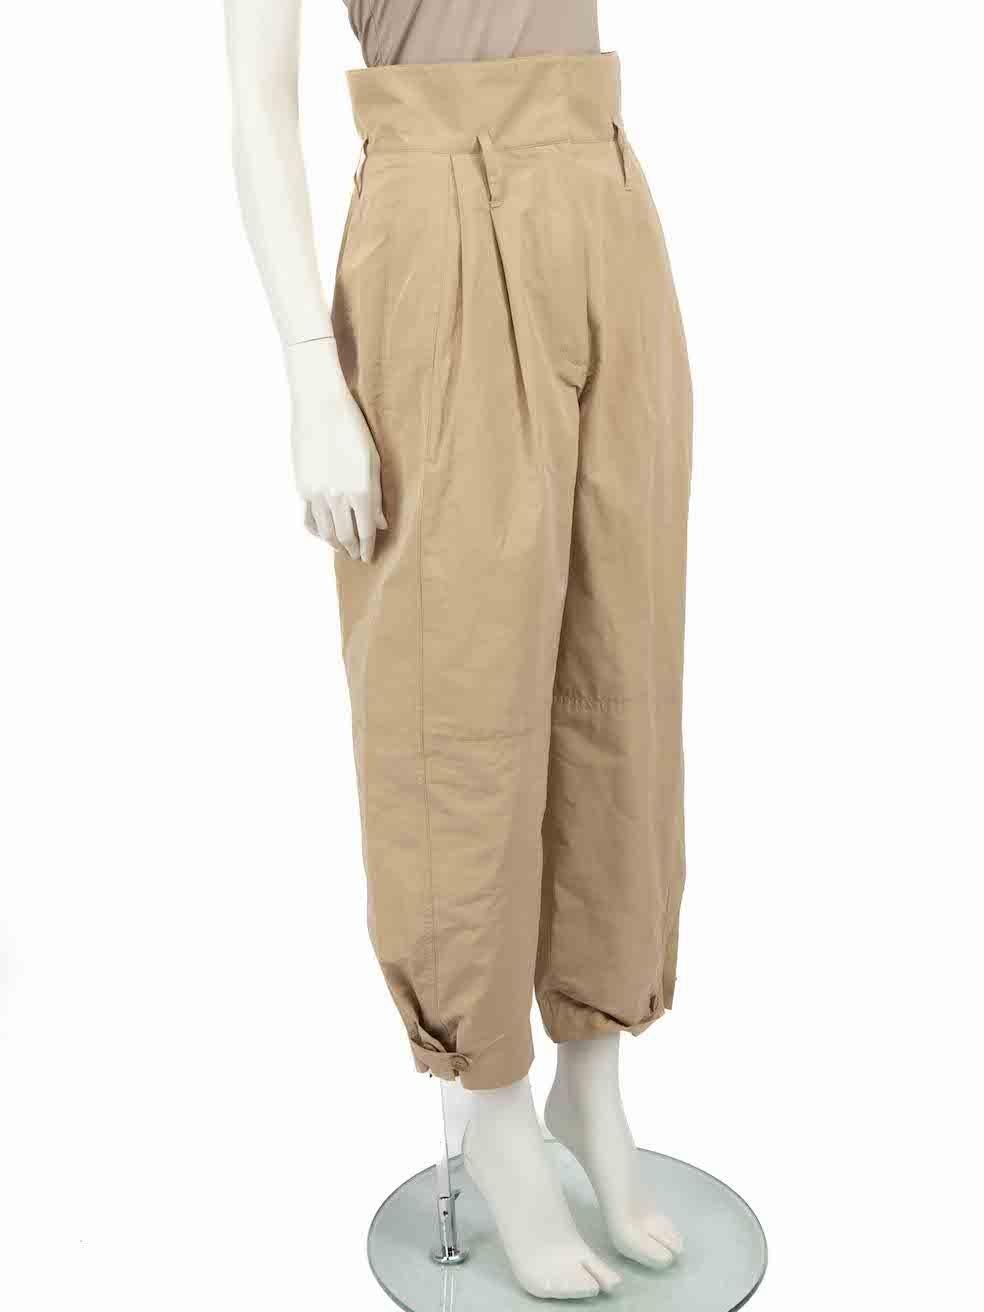 CONDITION is Good. Minor wear to trousers is evident. Light marks to waistband on this used Givenchy designer resale item.
 
 
 
 Details
 
 
 Beige
 
 Polyester
 
 Trousers
 
 Tapered leg
 
 High waisted
 
 Pleated detail
 
 2x Side pockets
 
 Fly